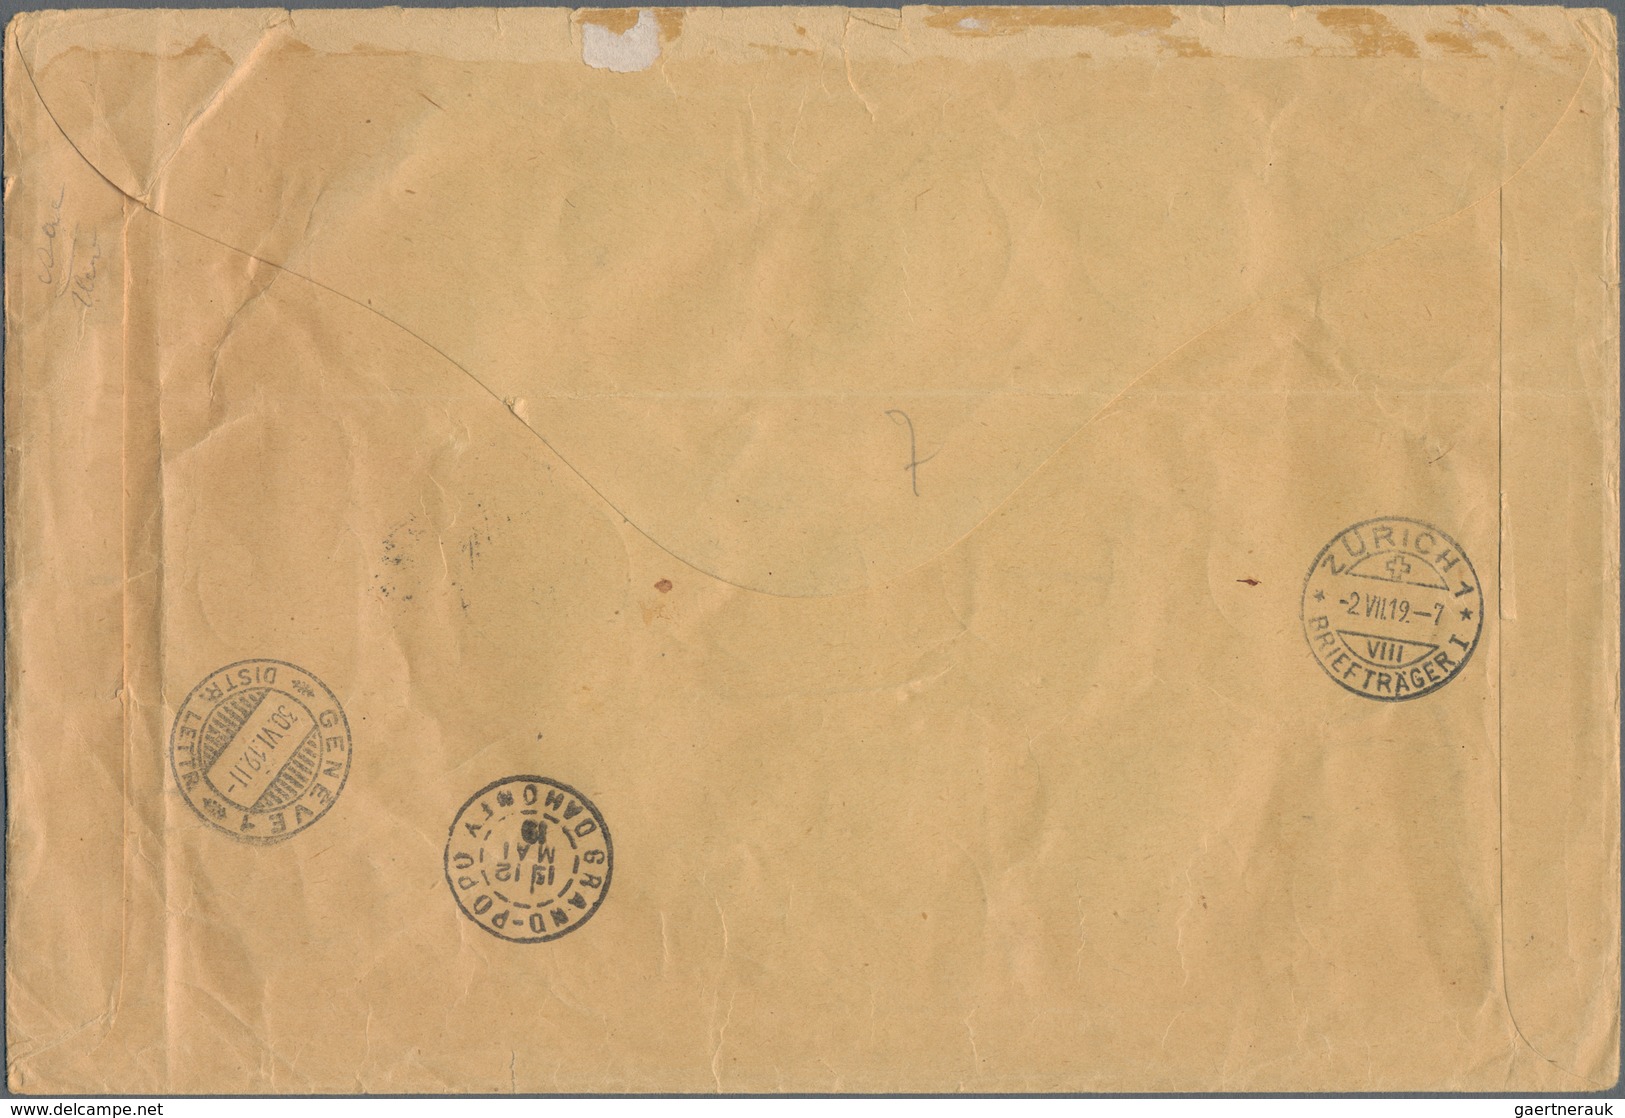 Togo: 1919 Registered Cover With Franking Of The Issue Of 1916 By Dahomey With Overprint Franco-Engl - Togo (1960-...)